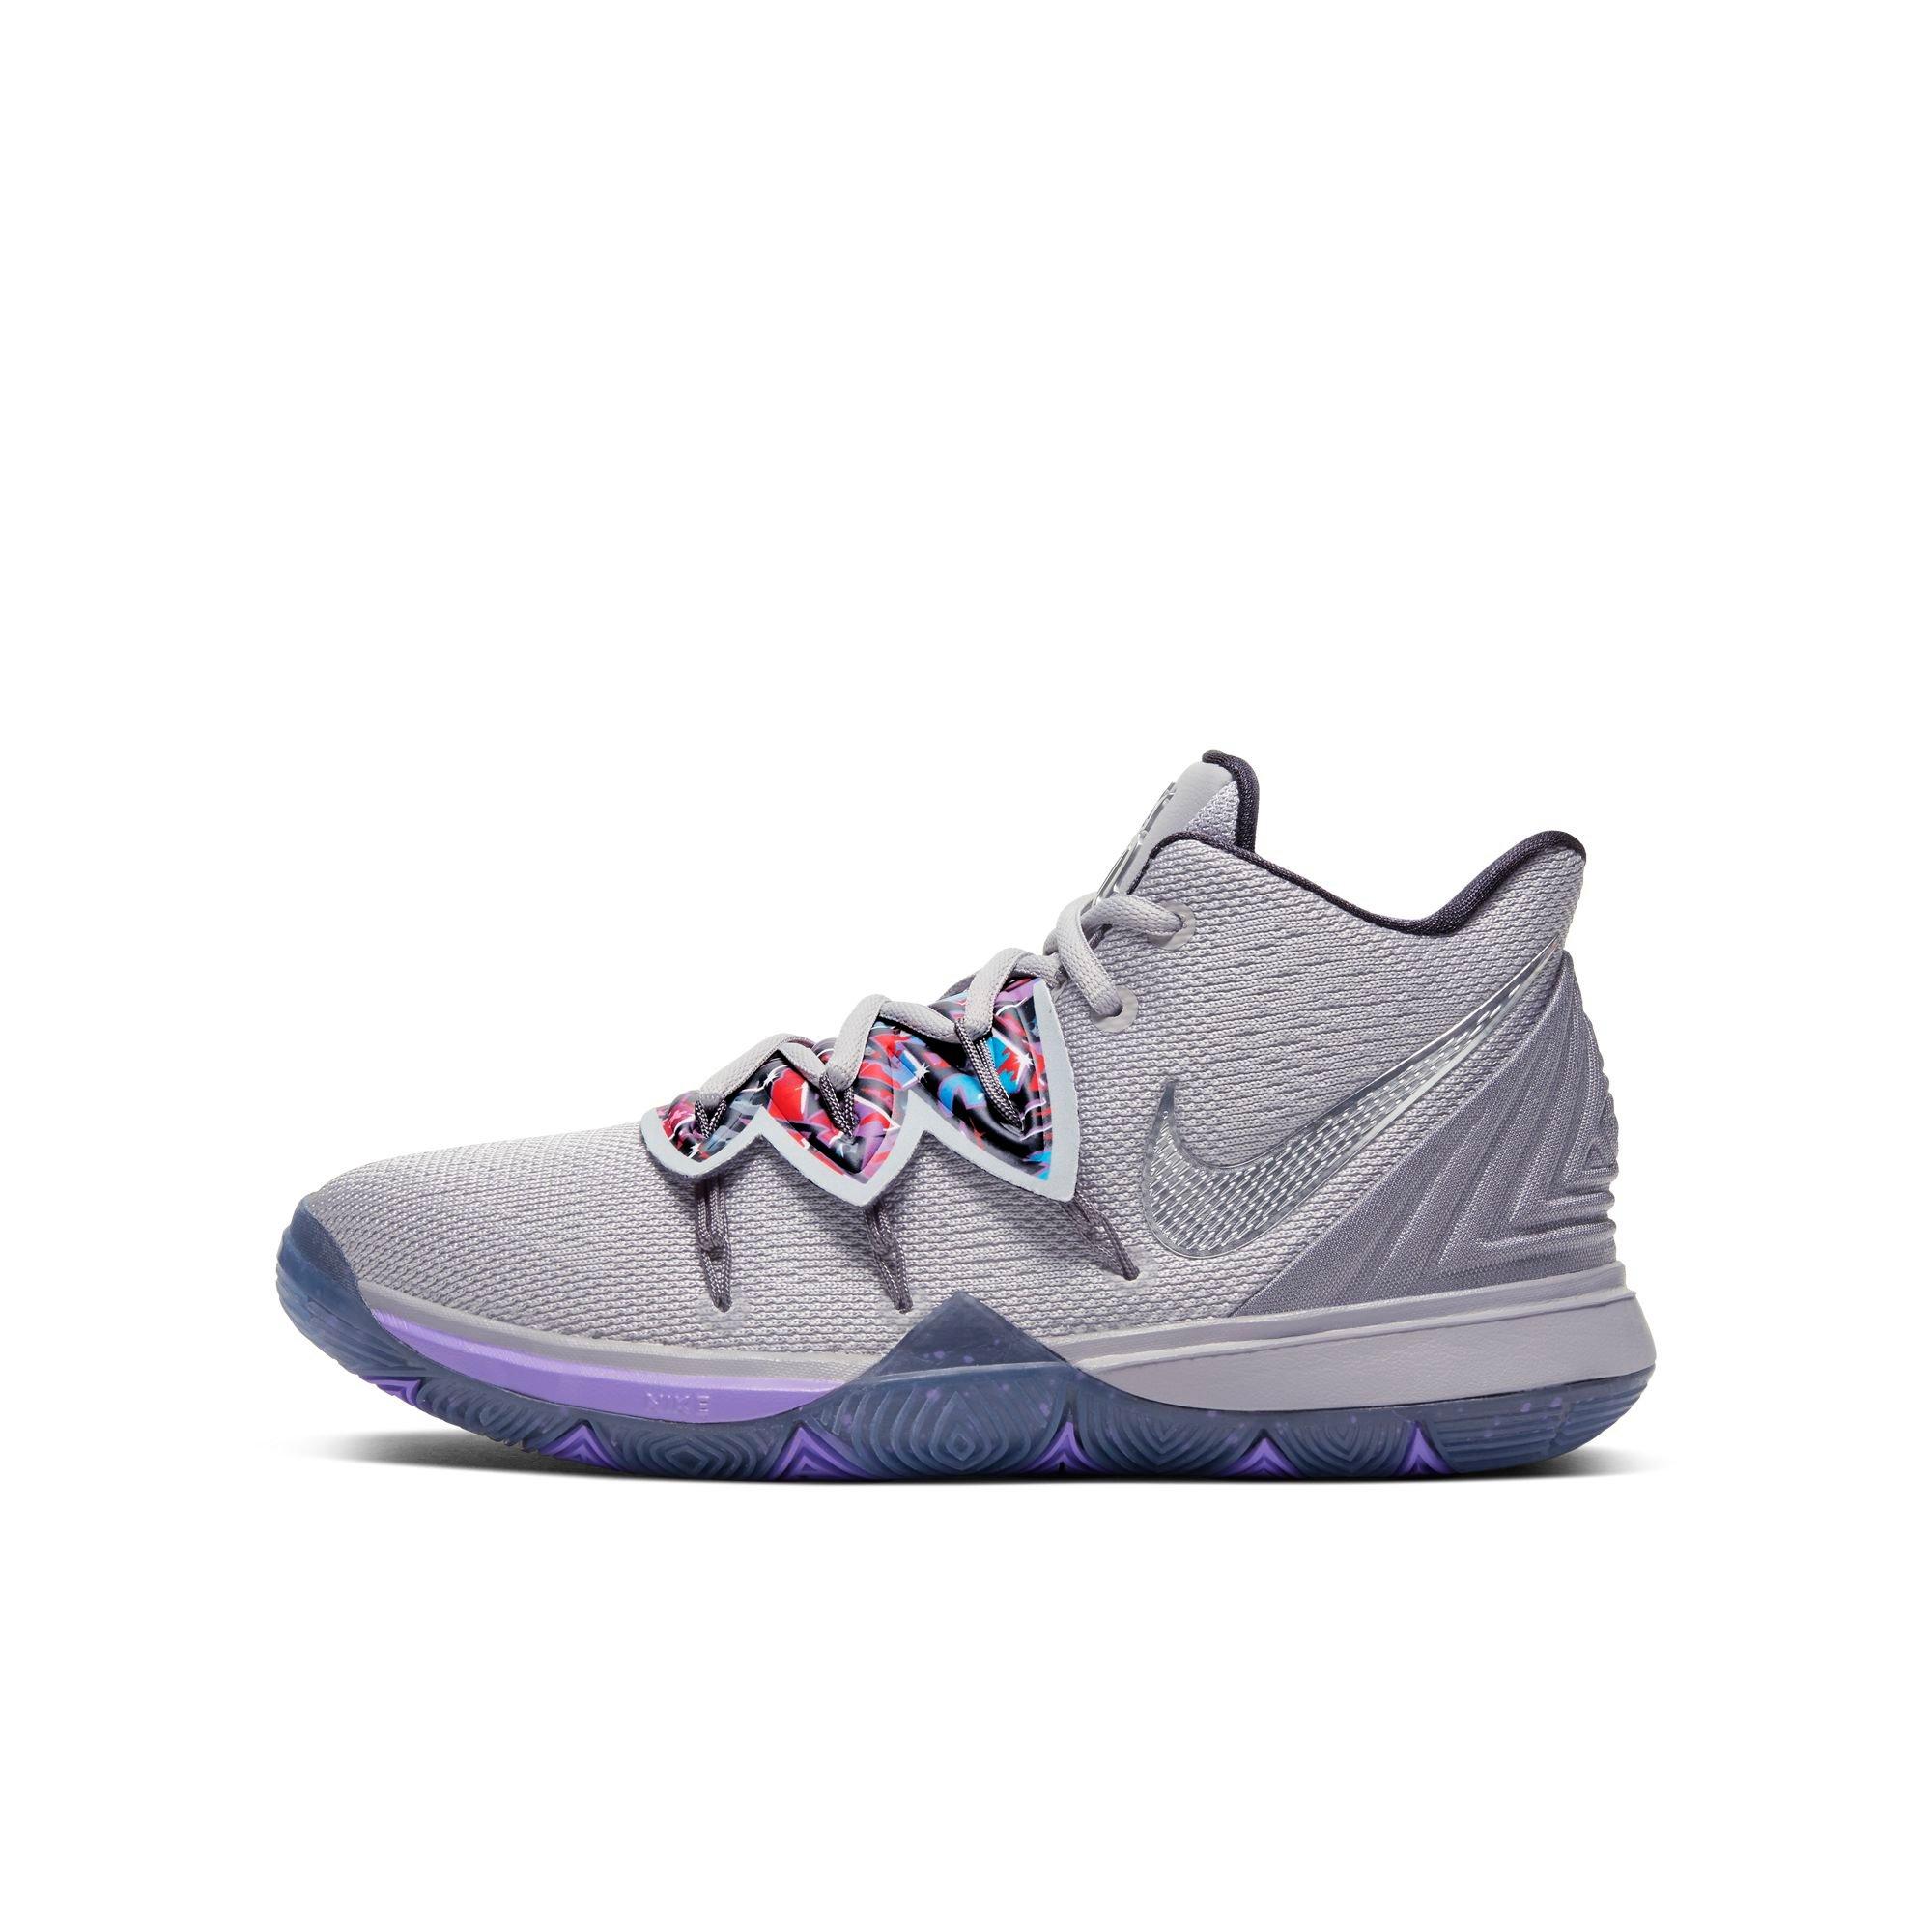 kyrie 5 purple and grey